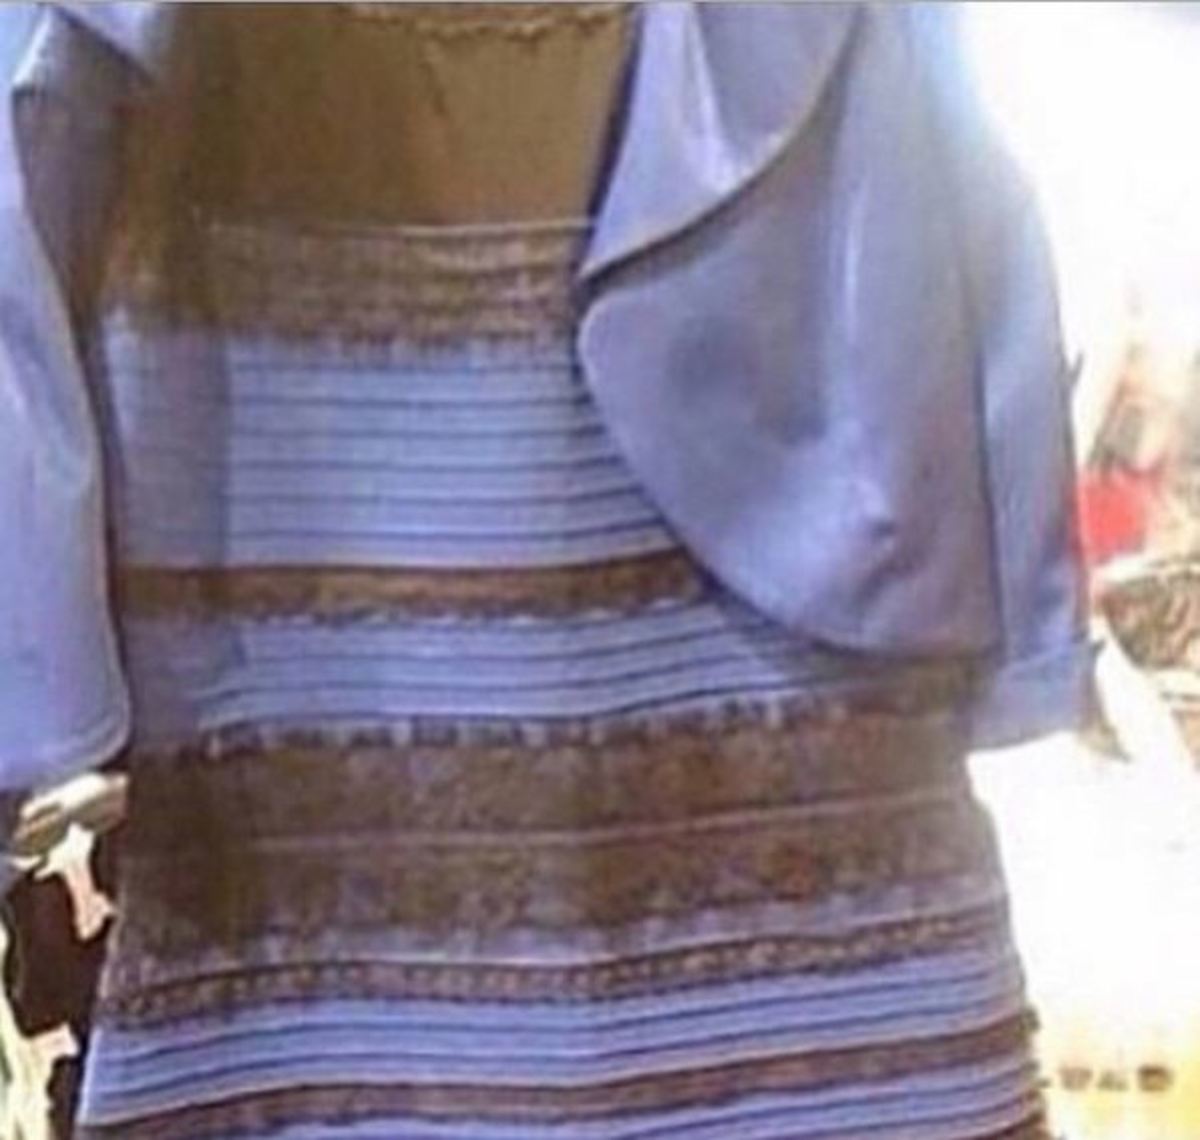 The dress that tore apart the internet in February 2015.